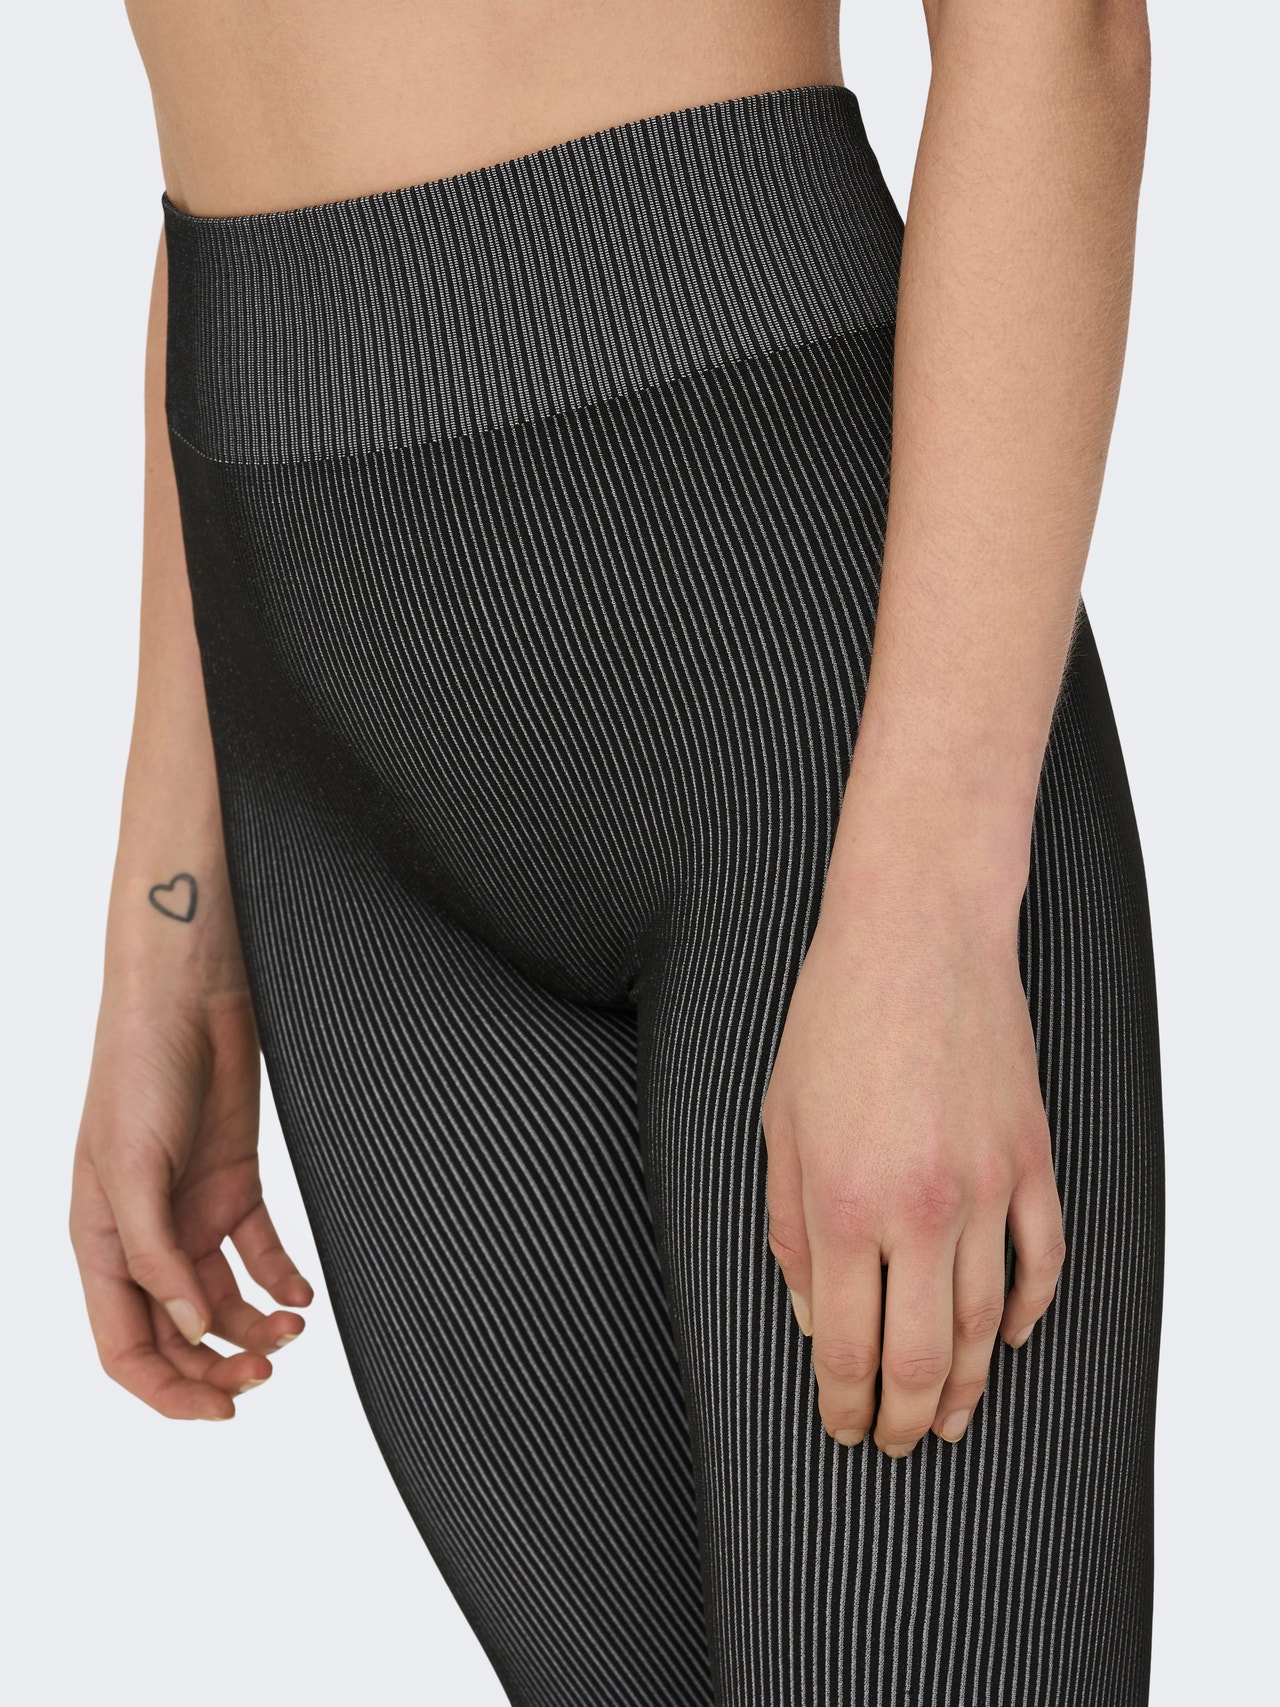 Tight Fit Leggings with 20% discount!